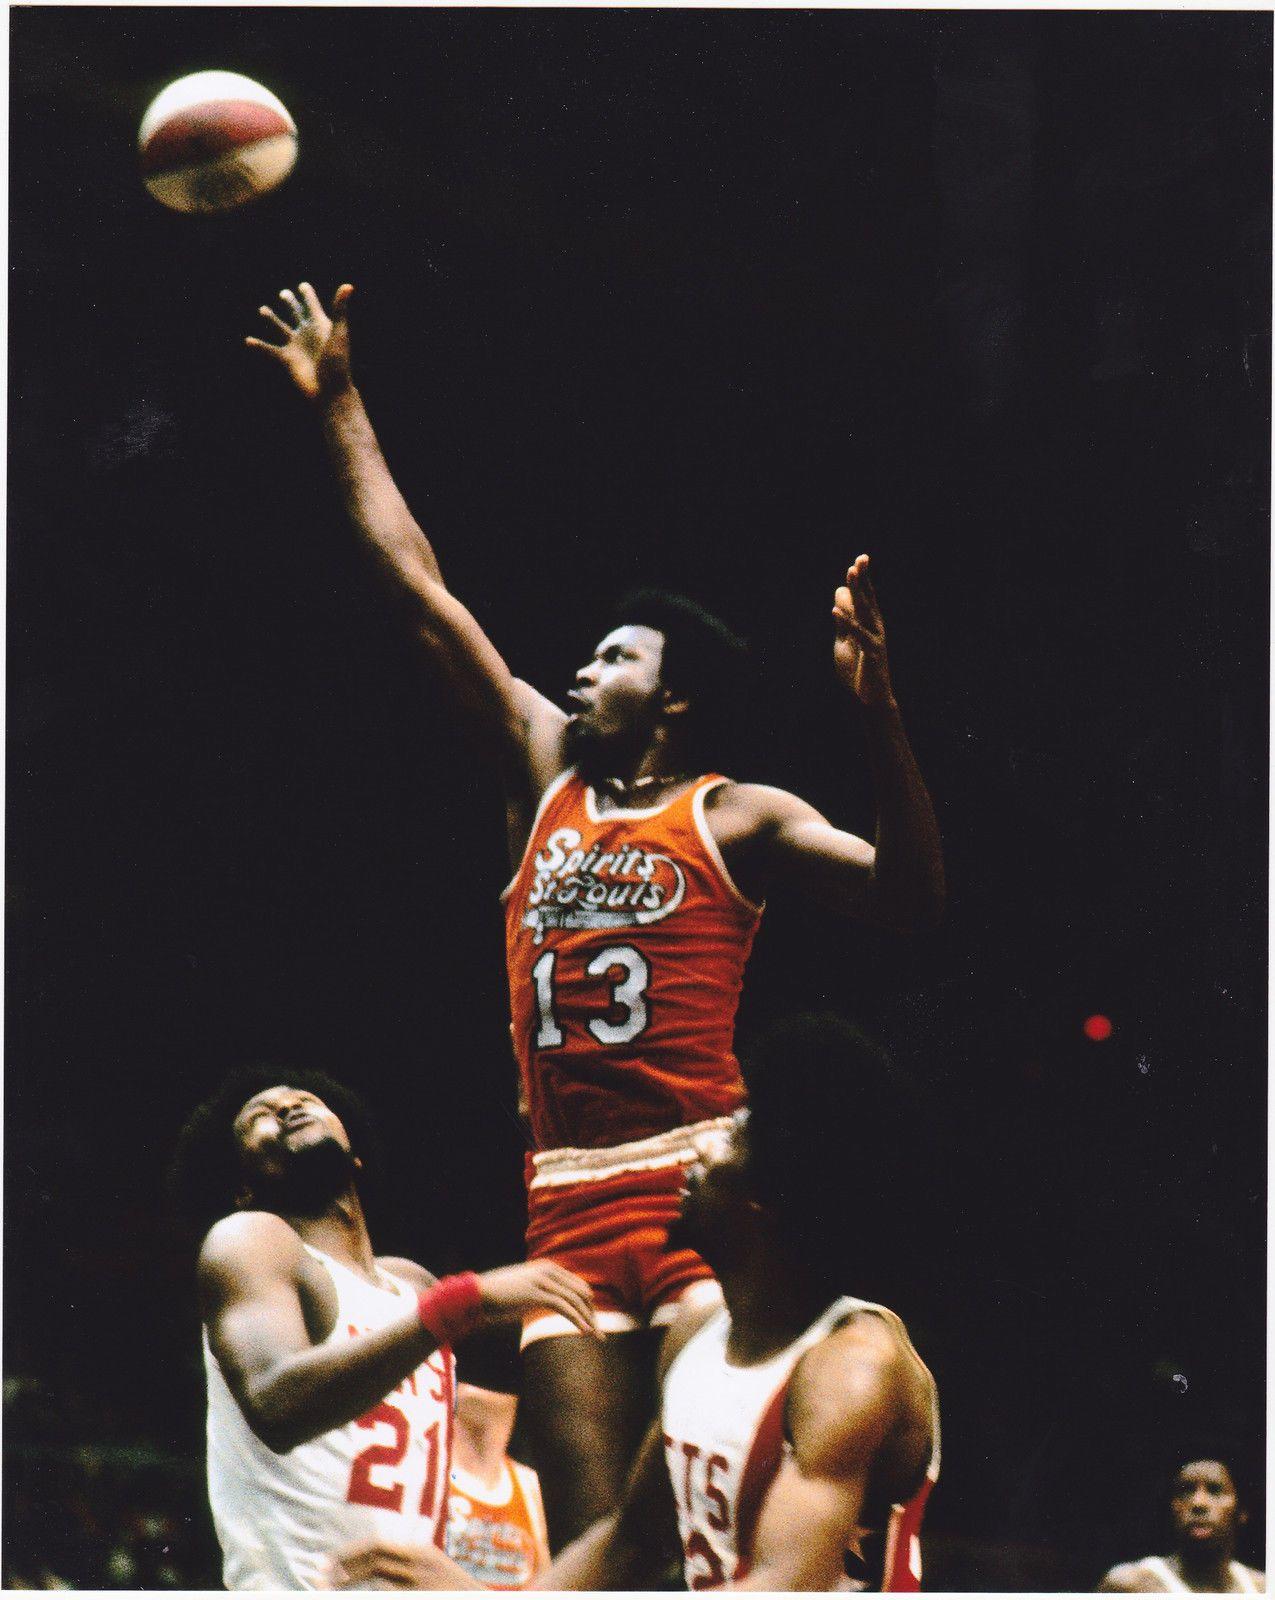 The late, great Moses Malone lifts off for the Spirits of St. Louis